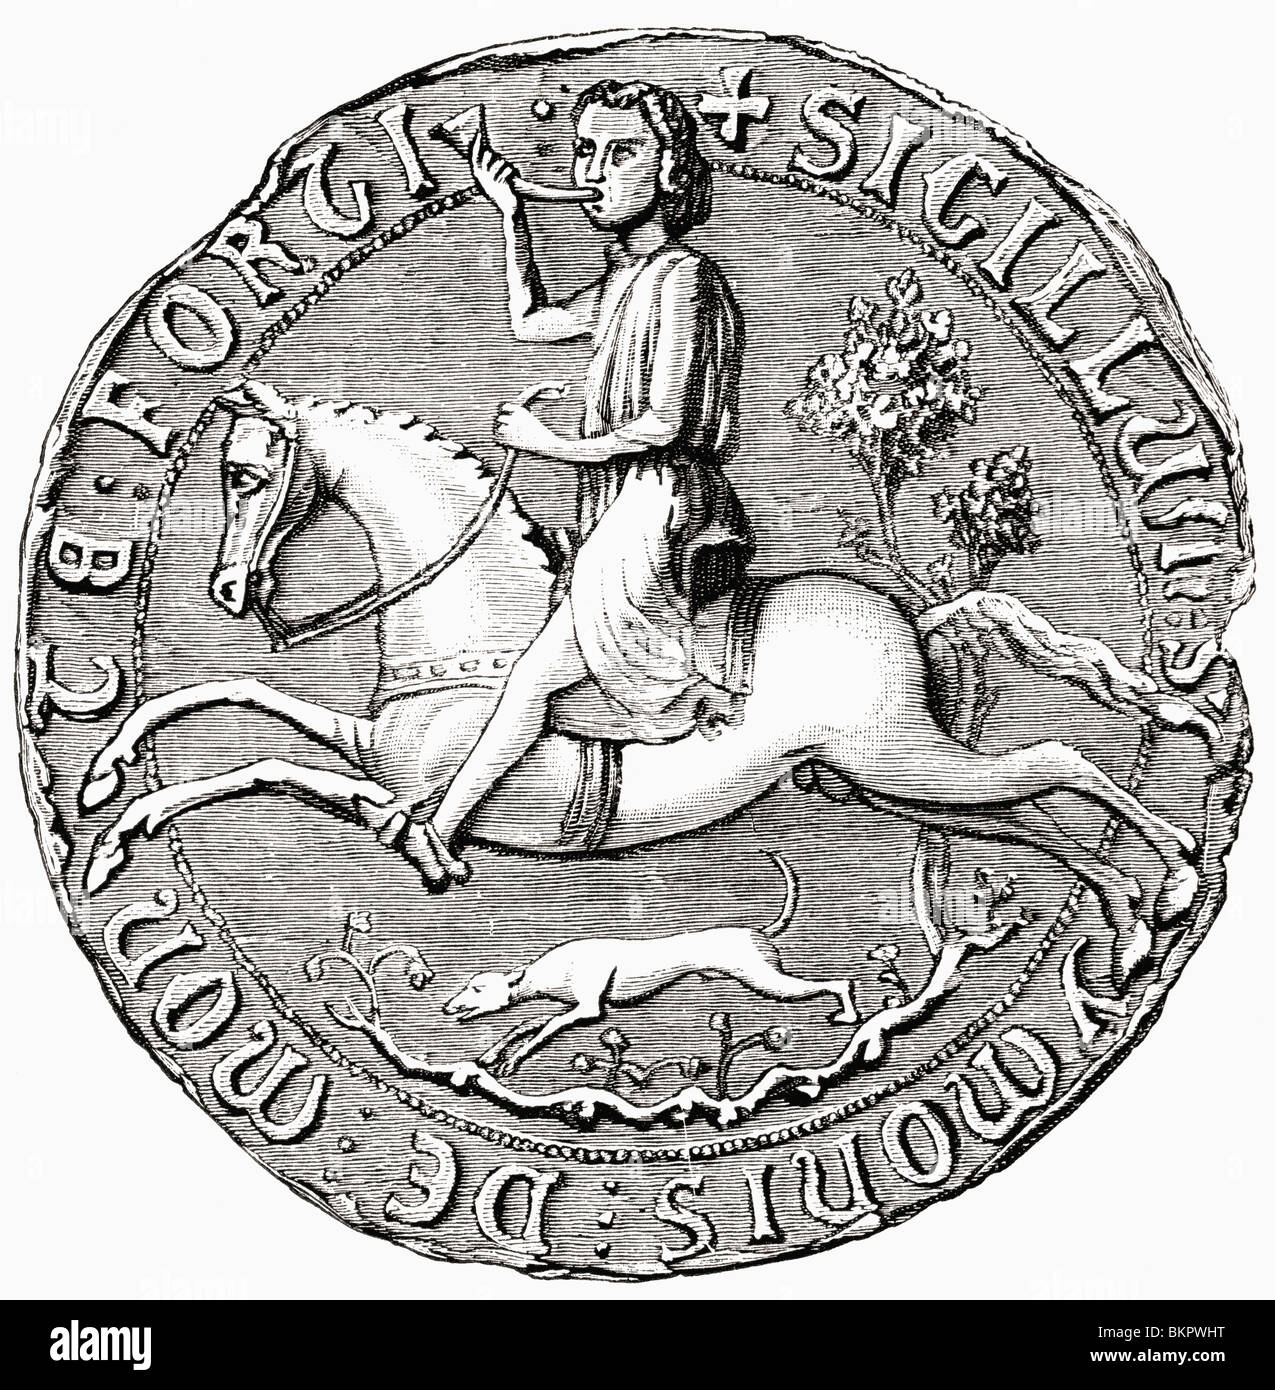 Seal of French-English nobleman Simon de Montfort, 6th Earl of Leicester, 1208 to 1265. Stock Photo